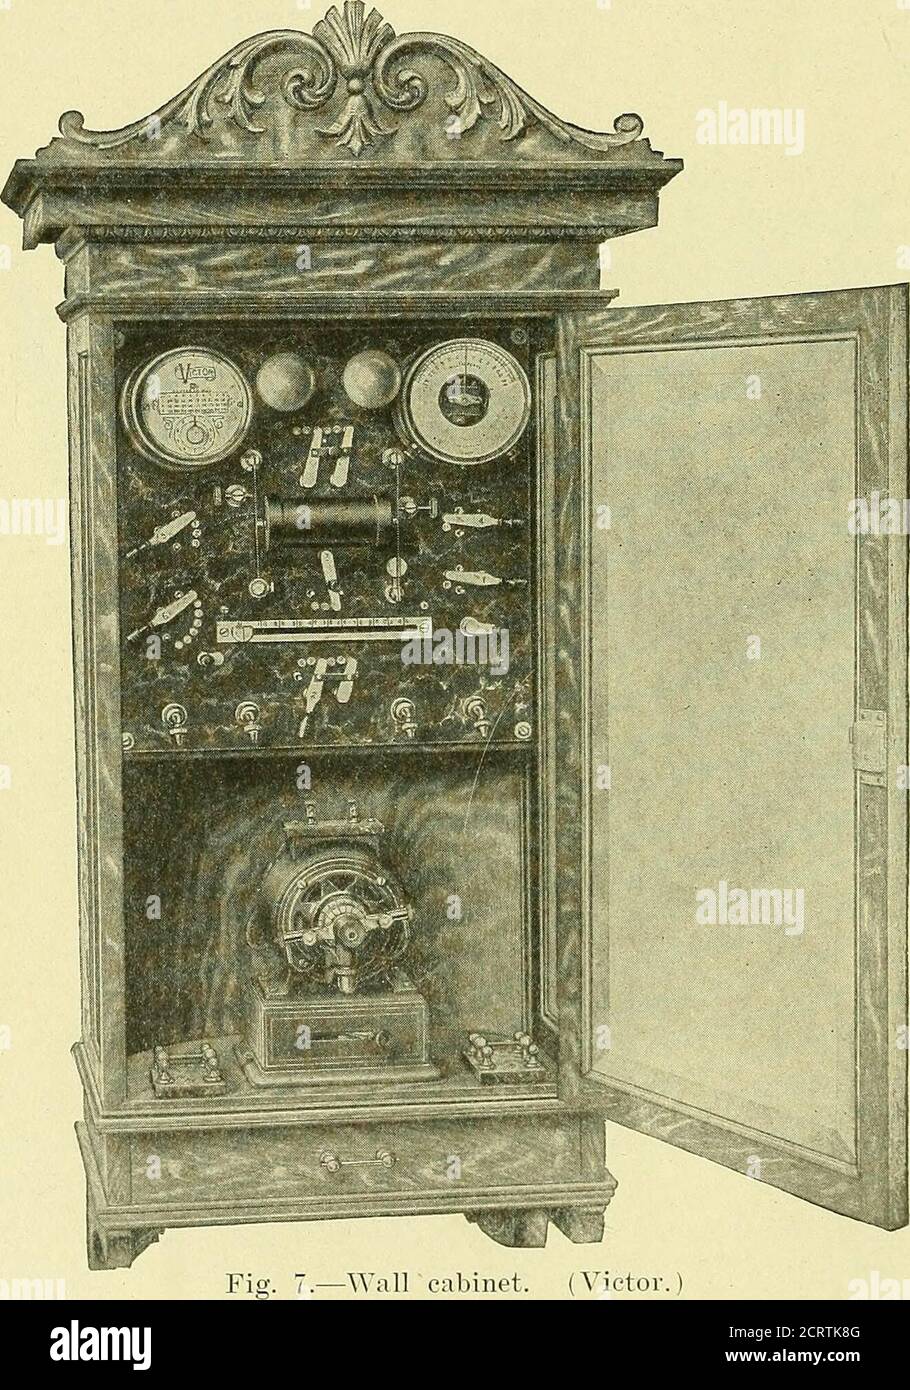 . Hand-book of electro-therapeutics . Fig. 6.—Floar cabinet. (Victor. A rectifi.er is an apparatus ^vhich changes the alternatingcurrent into a direct one. Usually a current of 110 volts is furnished, although atJefferson Hospital the current is one of 220 volts. 28 ELECTRO-THERAPEUTICS. THREE-WIRE SYSTEM. In large cities where electric wires for lighting are usedthe electro-therapeutist may well dispense with cells, which are. troublesome at best. Some physicians seem to be afraid to usethe street current because of the frequent accidents which occuron the streets of large cities. One should Stock Photo